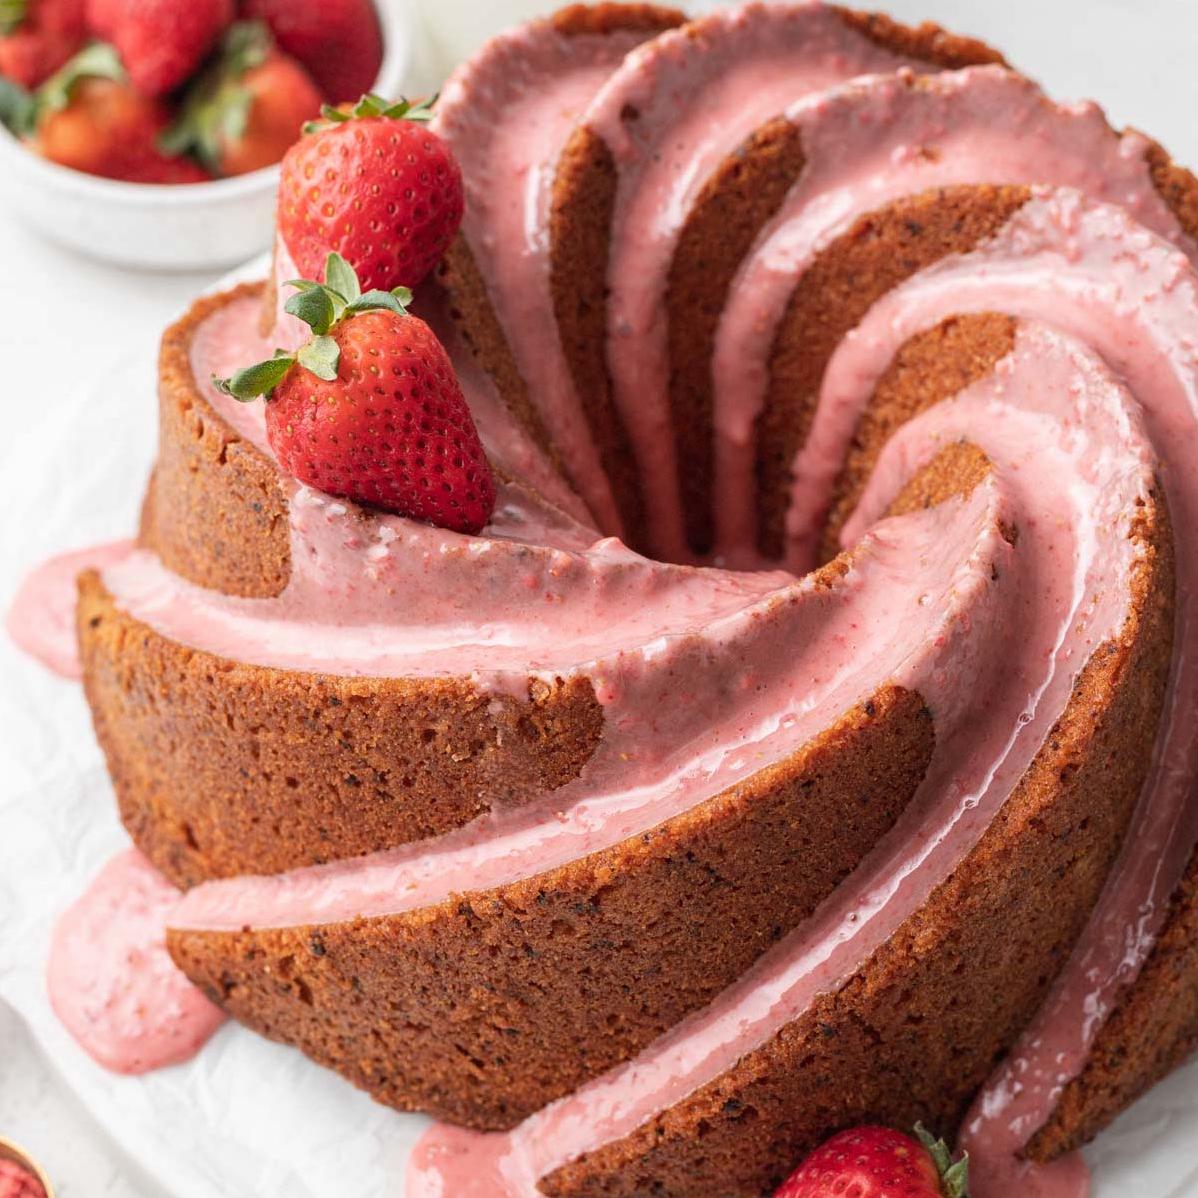  With its perfect crumb and sweet aroma, this cake is a summer essential.